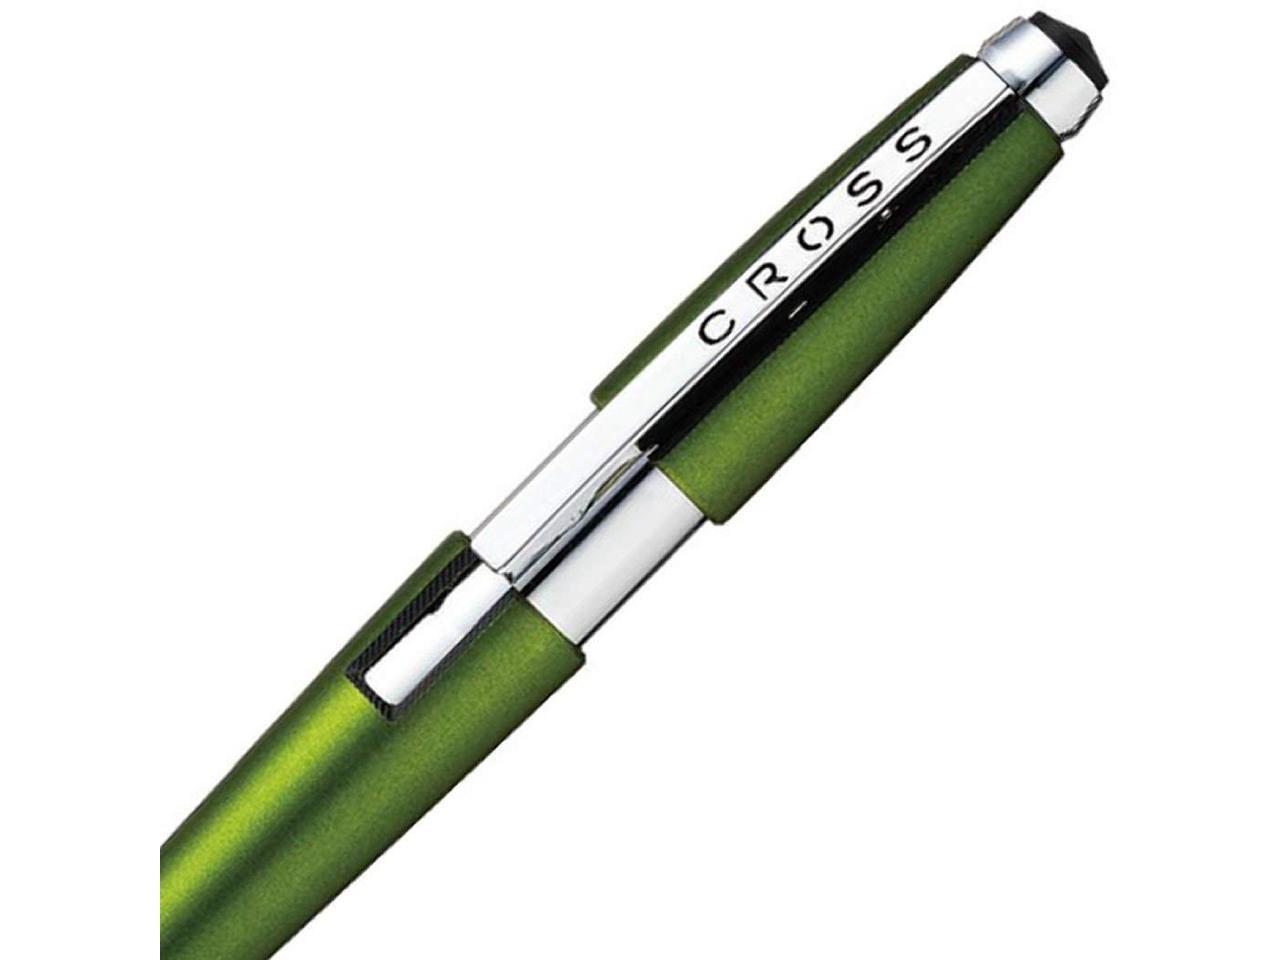 AT0555-4 CROSS OCTANE GREEN GEL INK EDGE ROLLERBALL PEN W CHROME APPOINTMENTS 